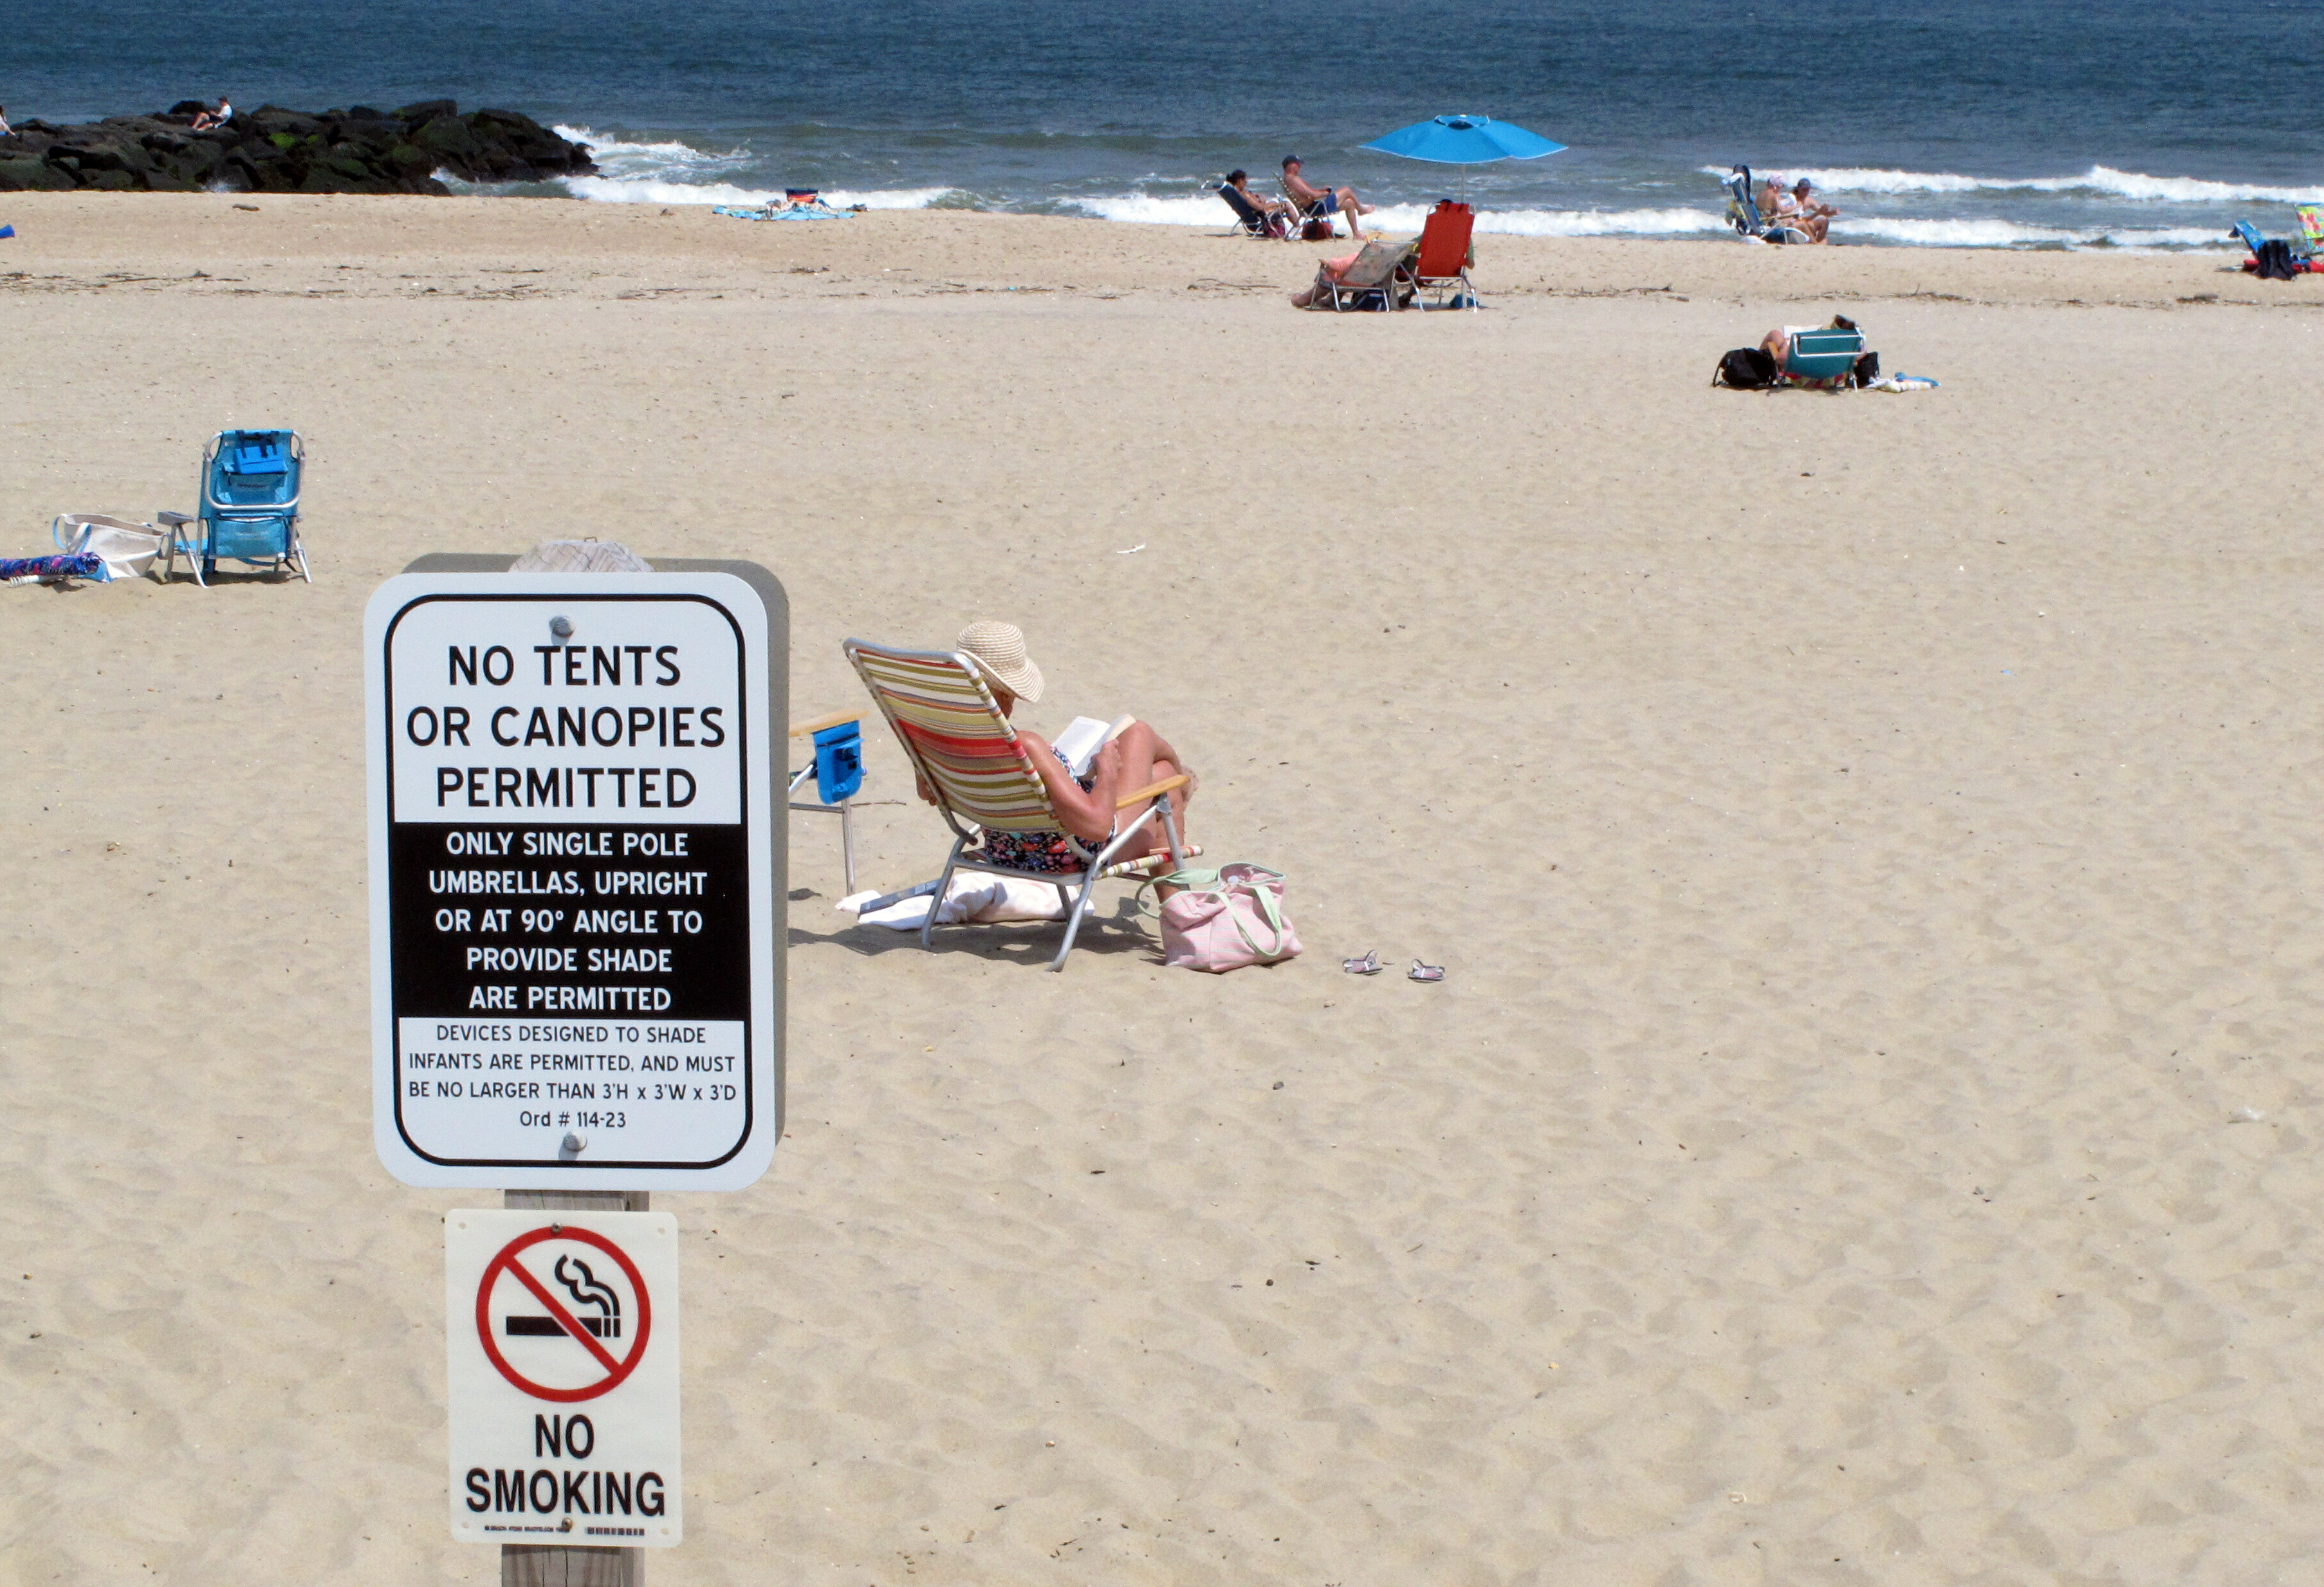 Jersey Shore' still promotes tanning, group says